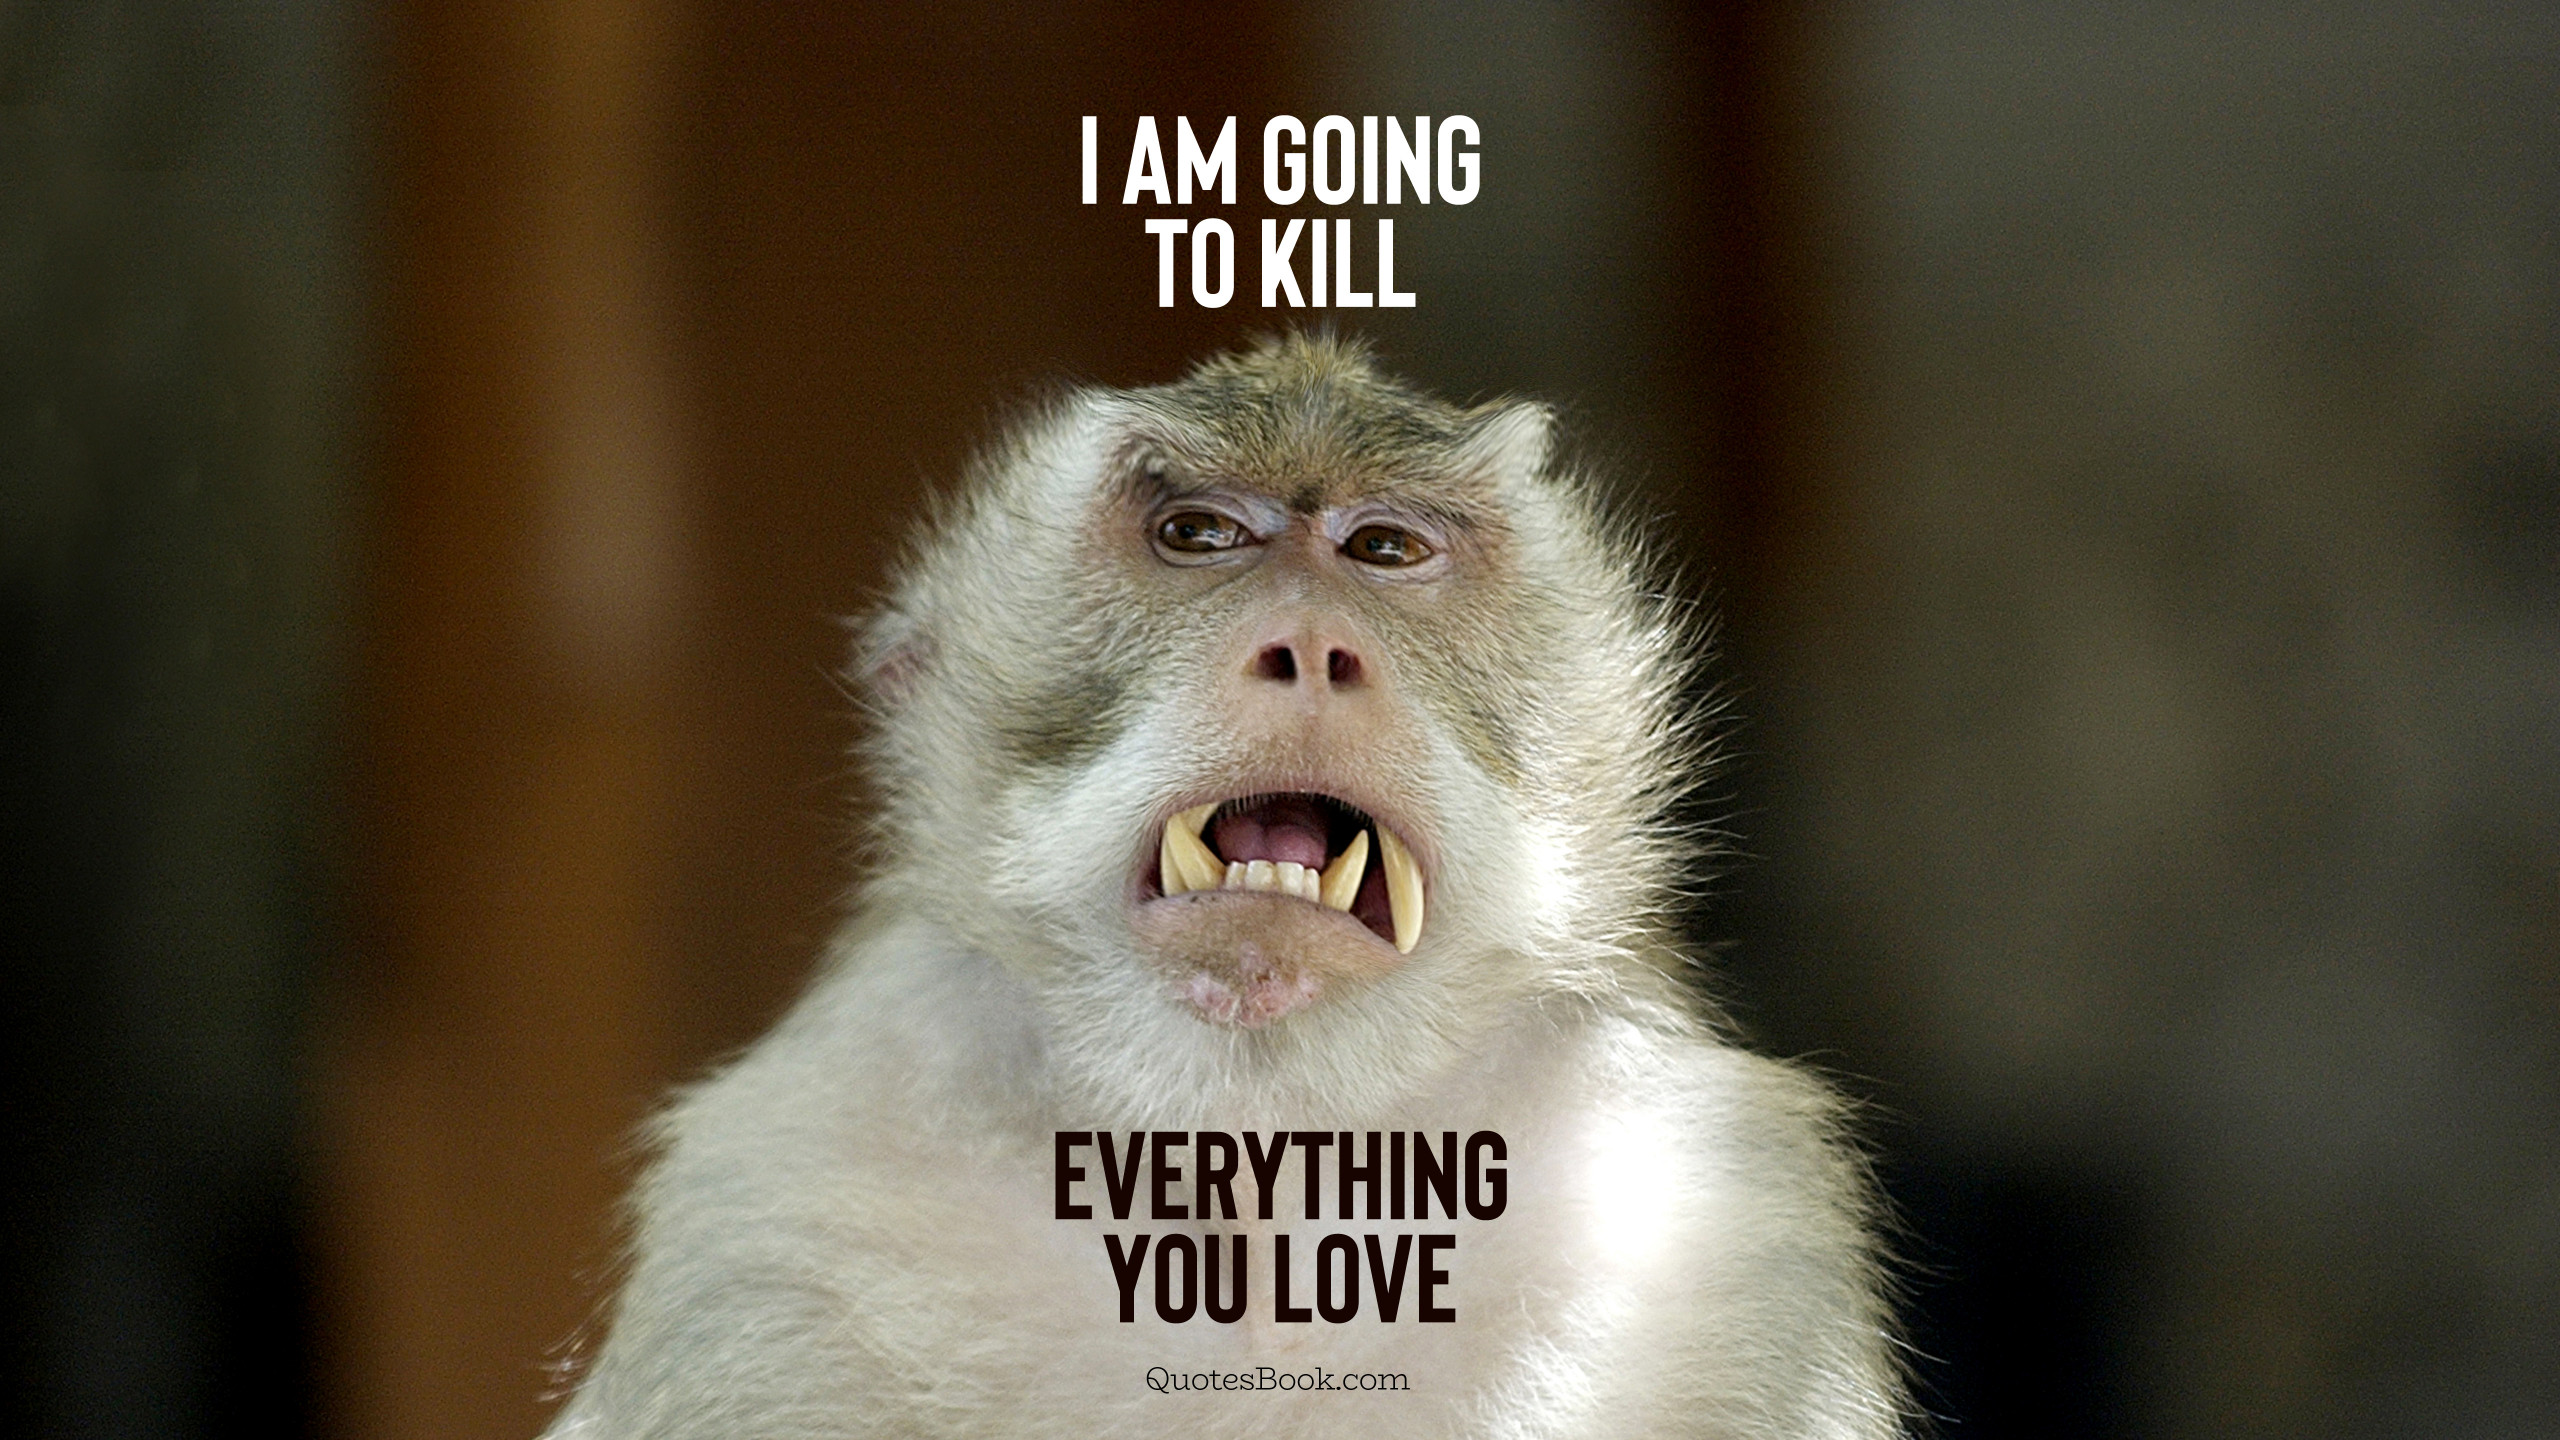 I'm going to kill everything you love - QuotesBook